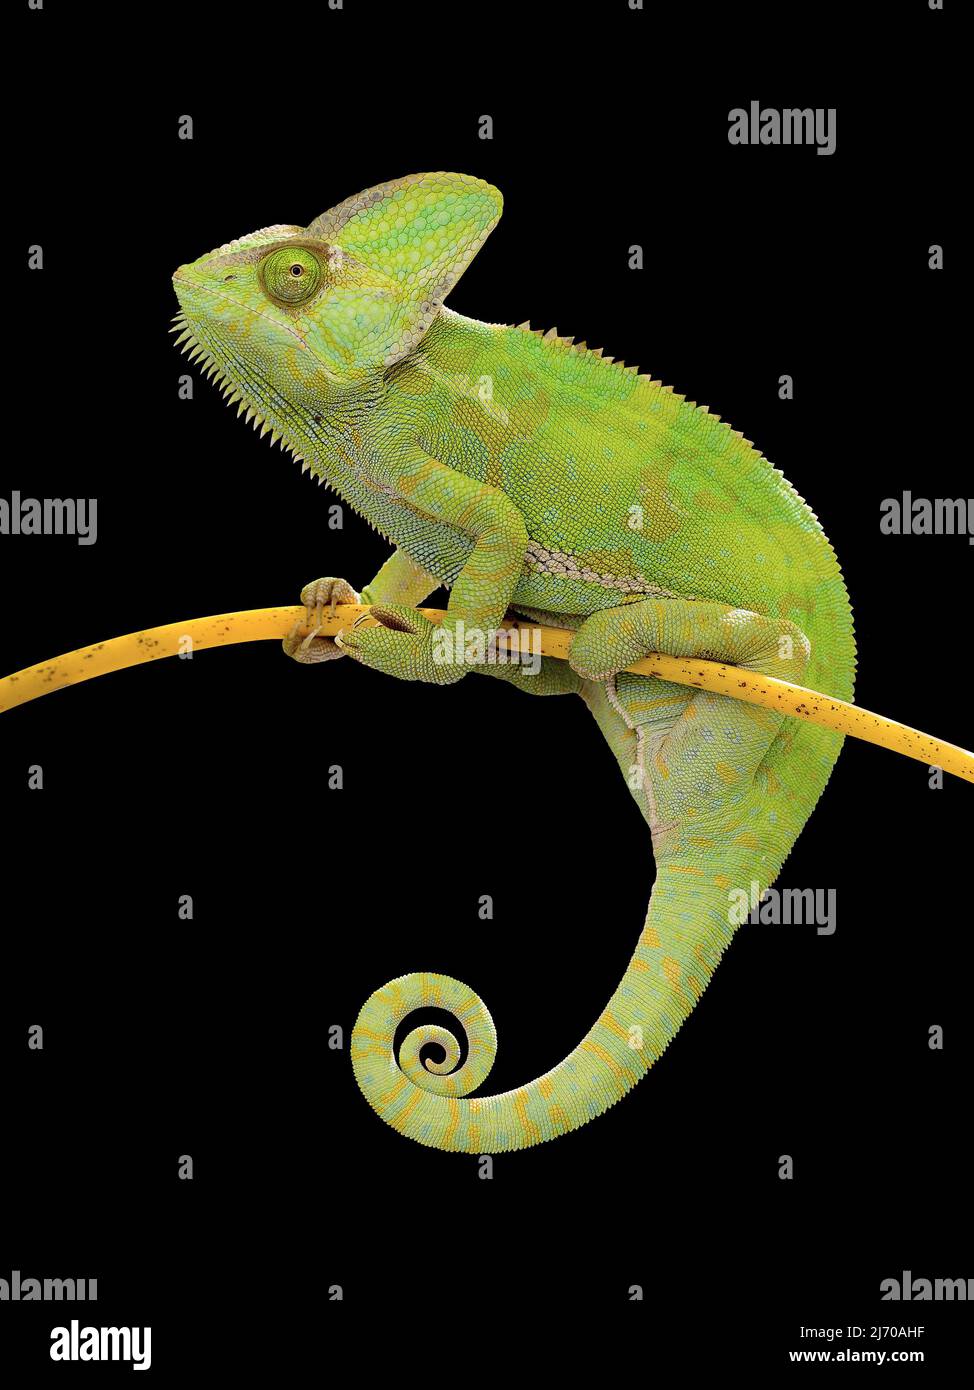 Chameleon climbing on branch on isolated black background. Female Chameleon with rolled tail and looking ahead. Stock Photo